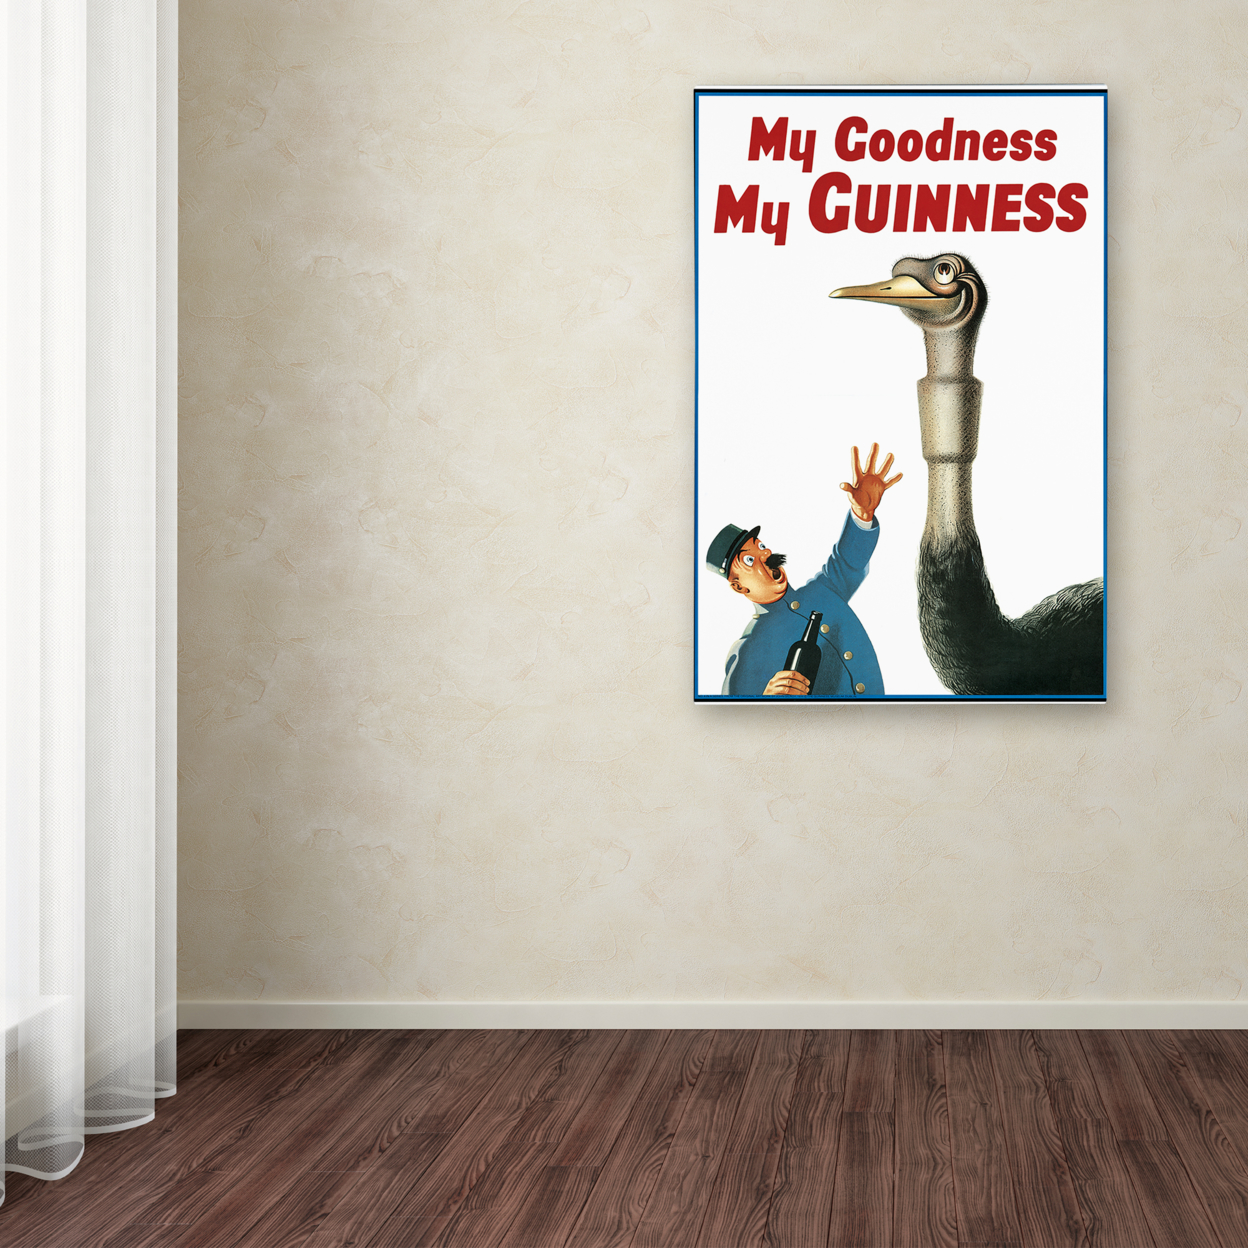 Guinness Brewery 'My Goodness My Guinness I' Canvas Art 16 X 24